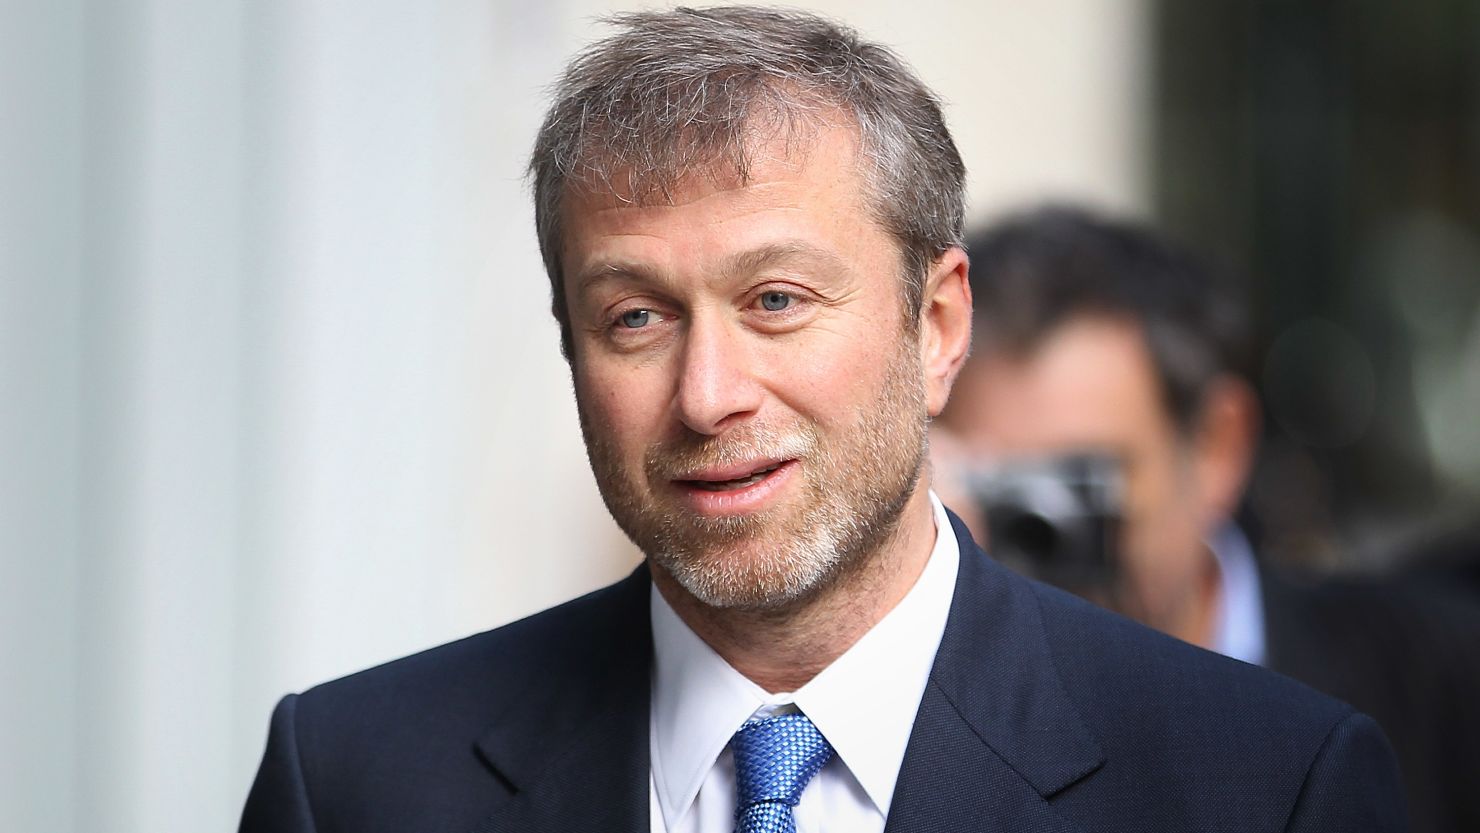 Chelsea owner Roman Abramovich has poured hundreds of millions of dollars into the EPL club.